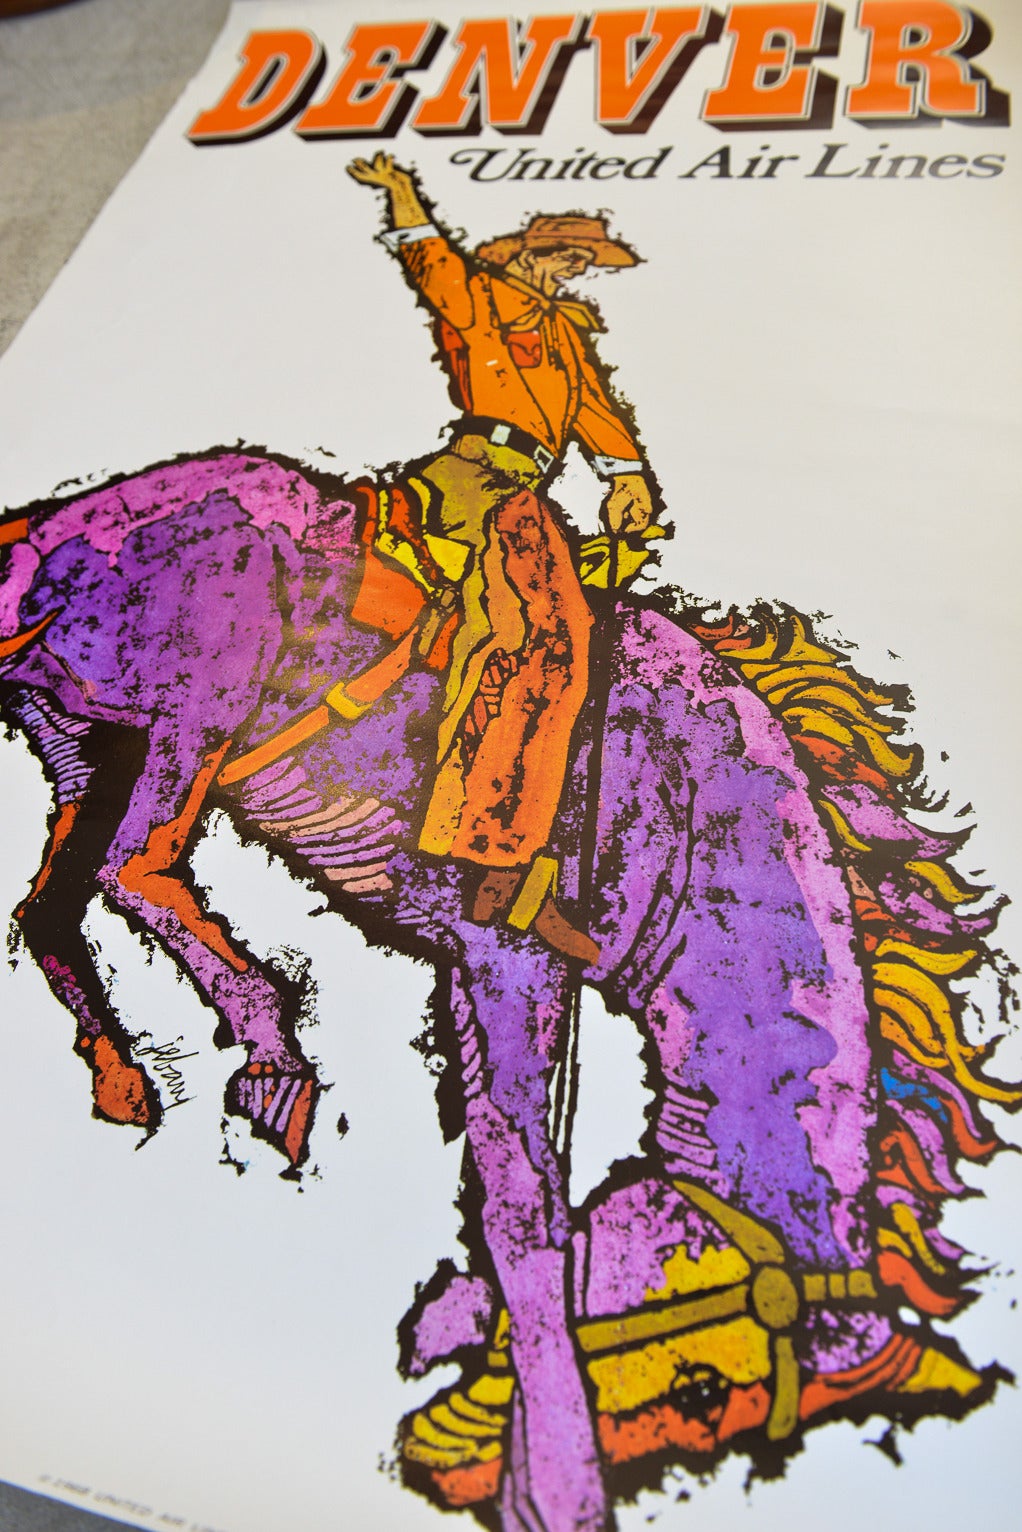 Beautifully preserved vintage United Airlines Travel Posters by Jebary. Denver depicts beautifully colored cowboy on a bucking bronco. Wonderful color and subject matter, these posters are dated 1968 and in excellent vintage condition with no holes